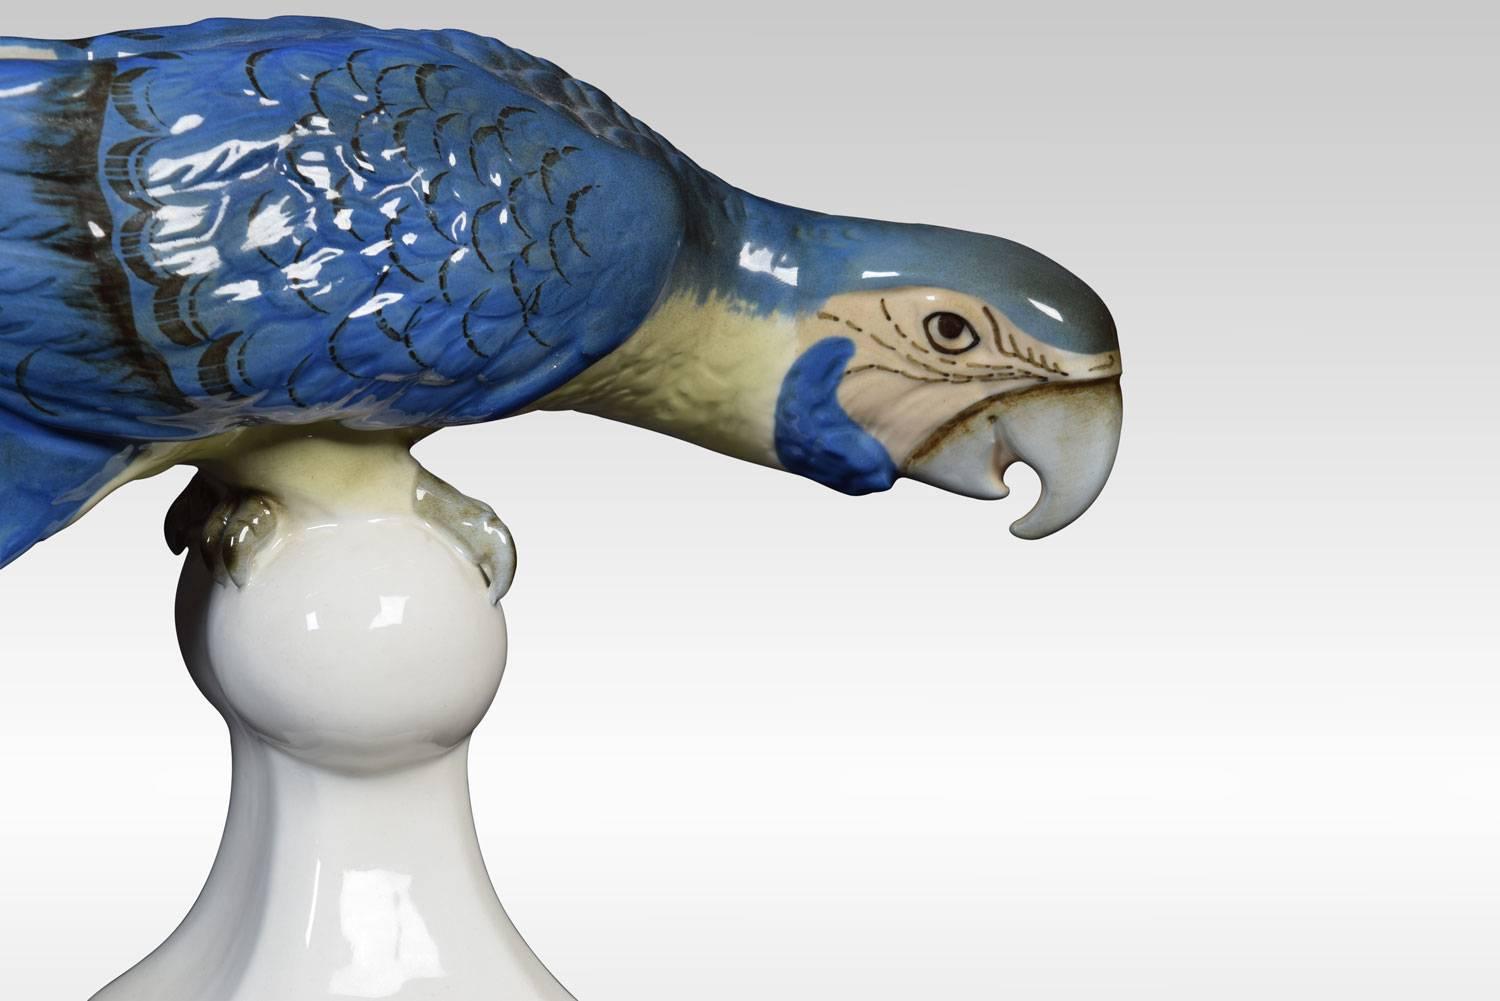 Royal dux model of a blue macaw, perched on a stand in typical inquisitive stance. Having pink triangle to base, together with printed and impressed marks.
Dimensions
Height 8.5 inches
Width 17 inches
Depth 5 inches.